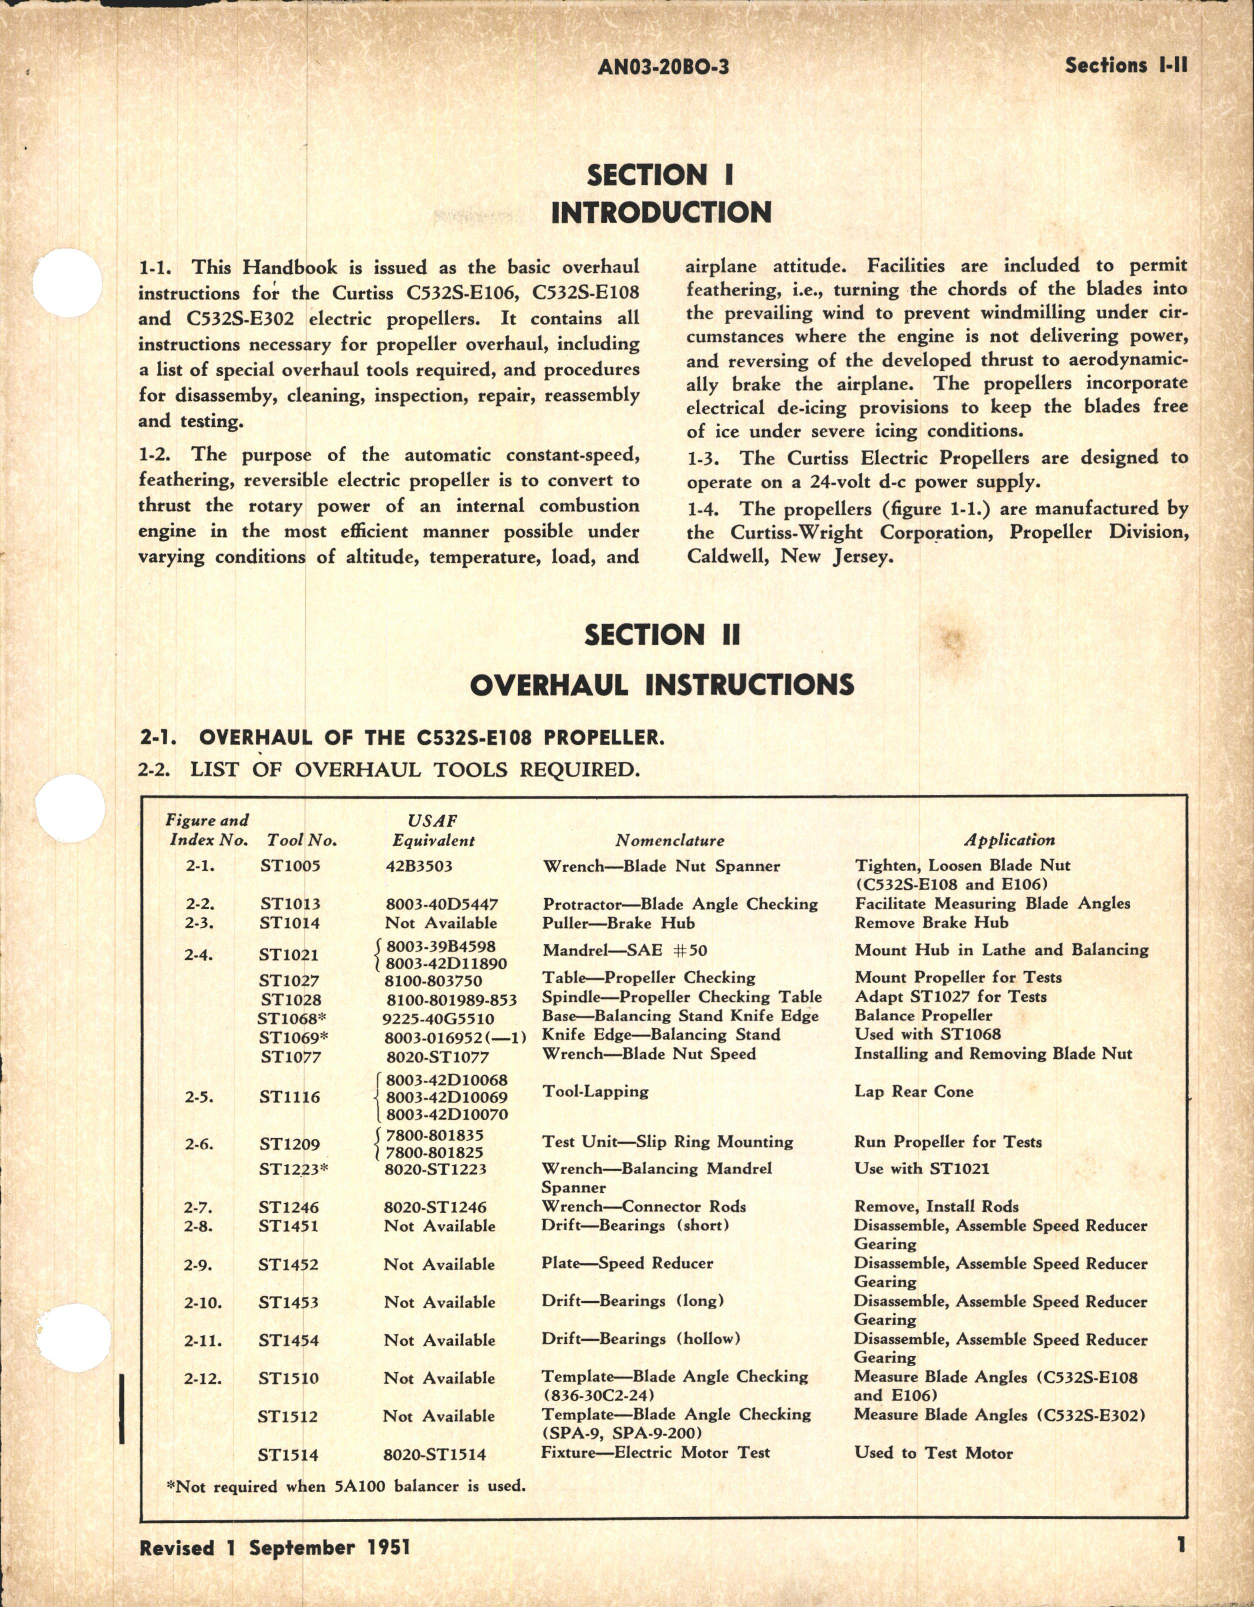 Sample page 5 from AirCorps Library document: Overhaul Instructions for Electric Propeller Models C532S-E